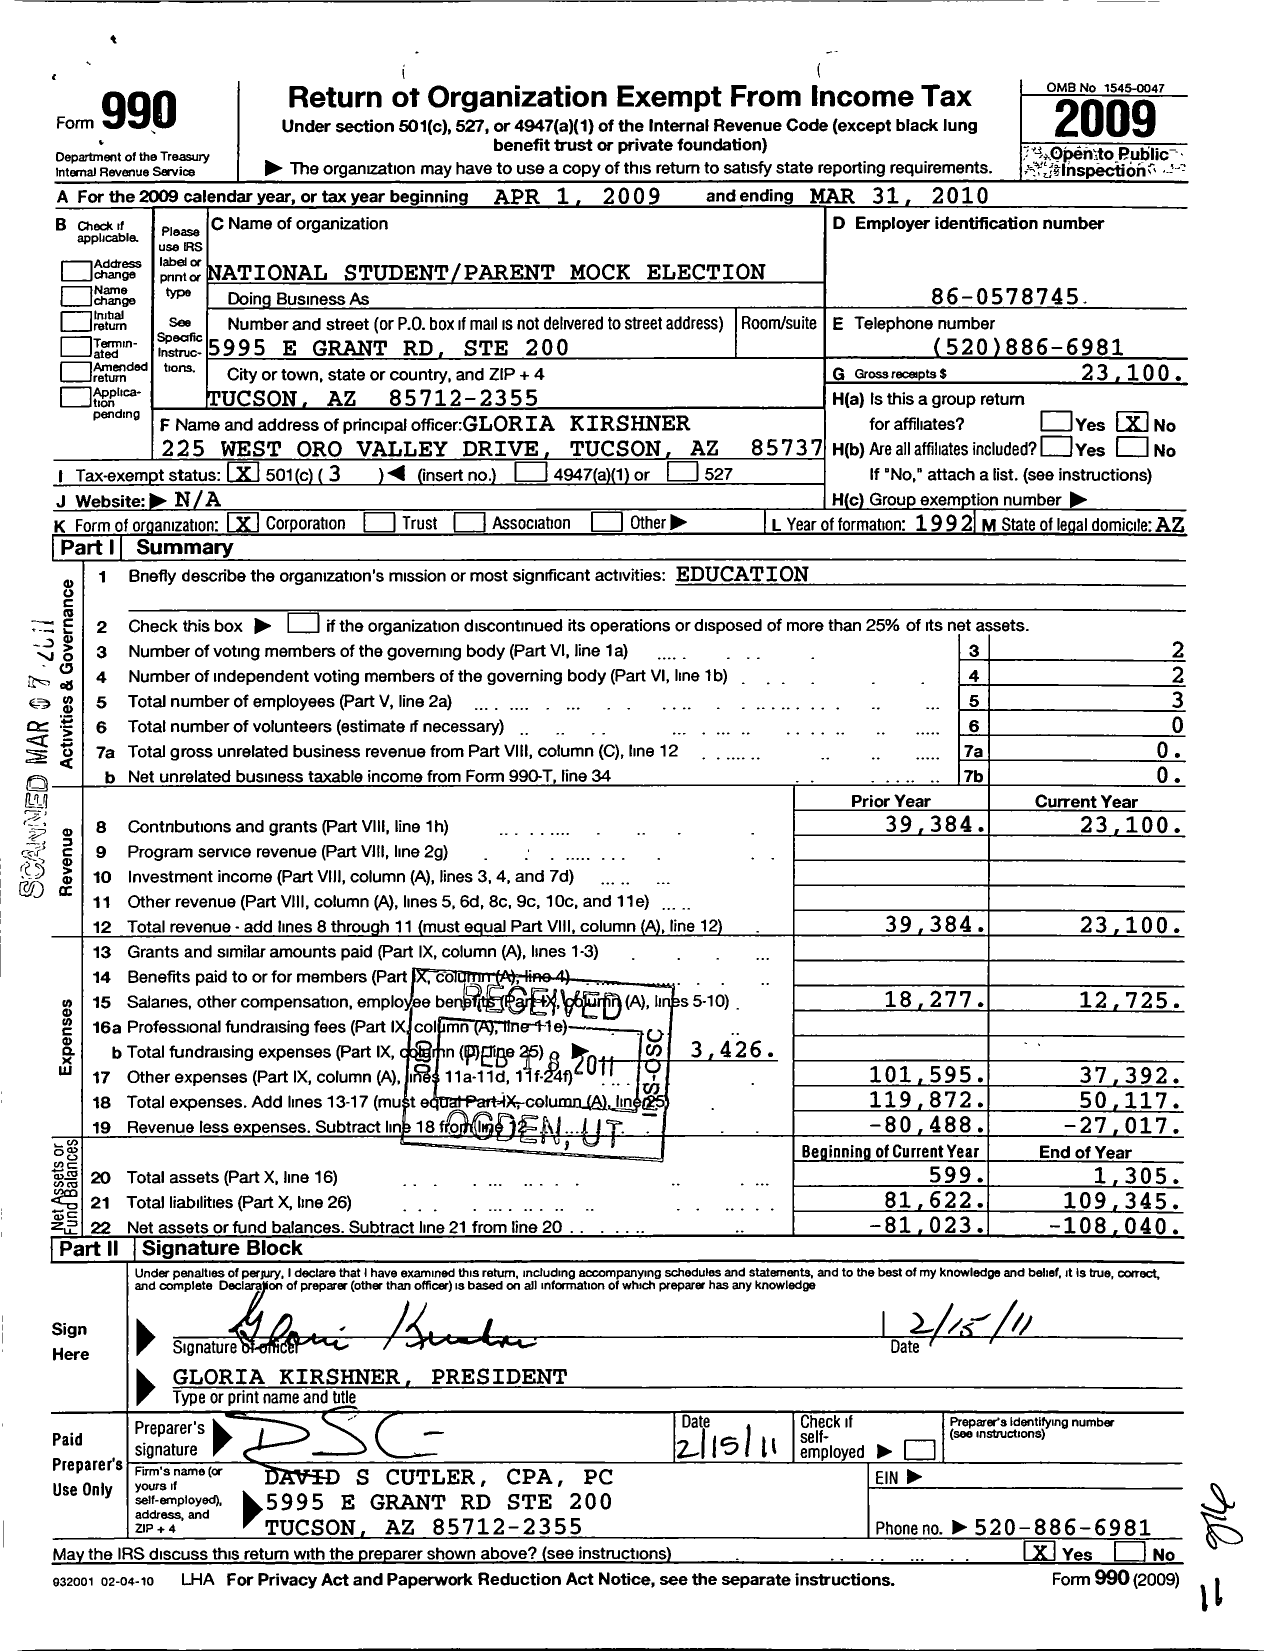 Image of first page of 2009 Form 990 for National Student Parent Mock Election